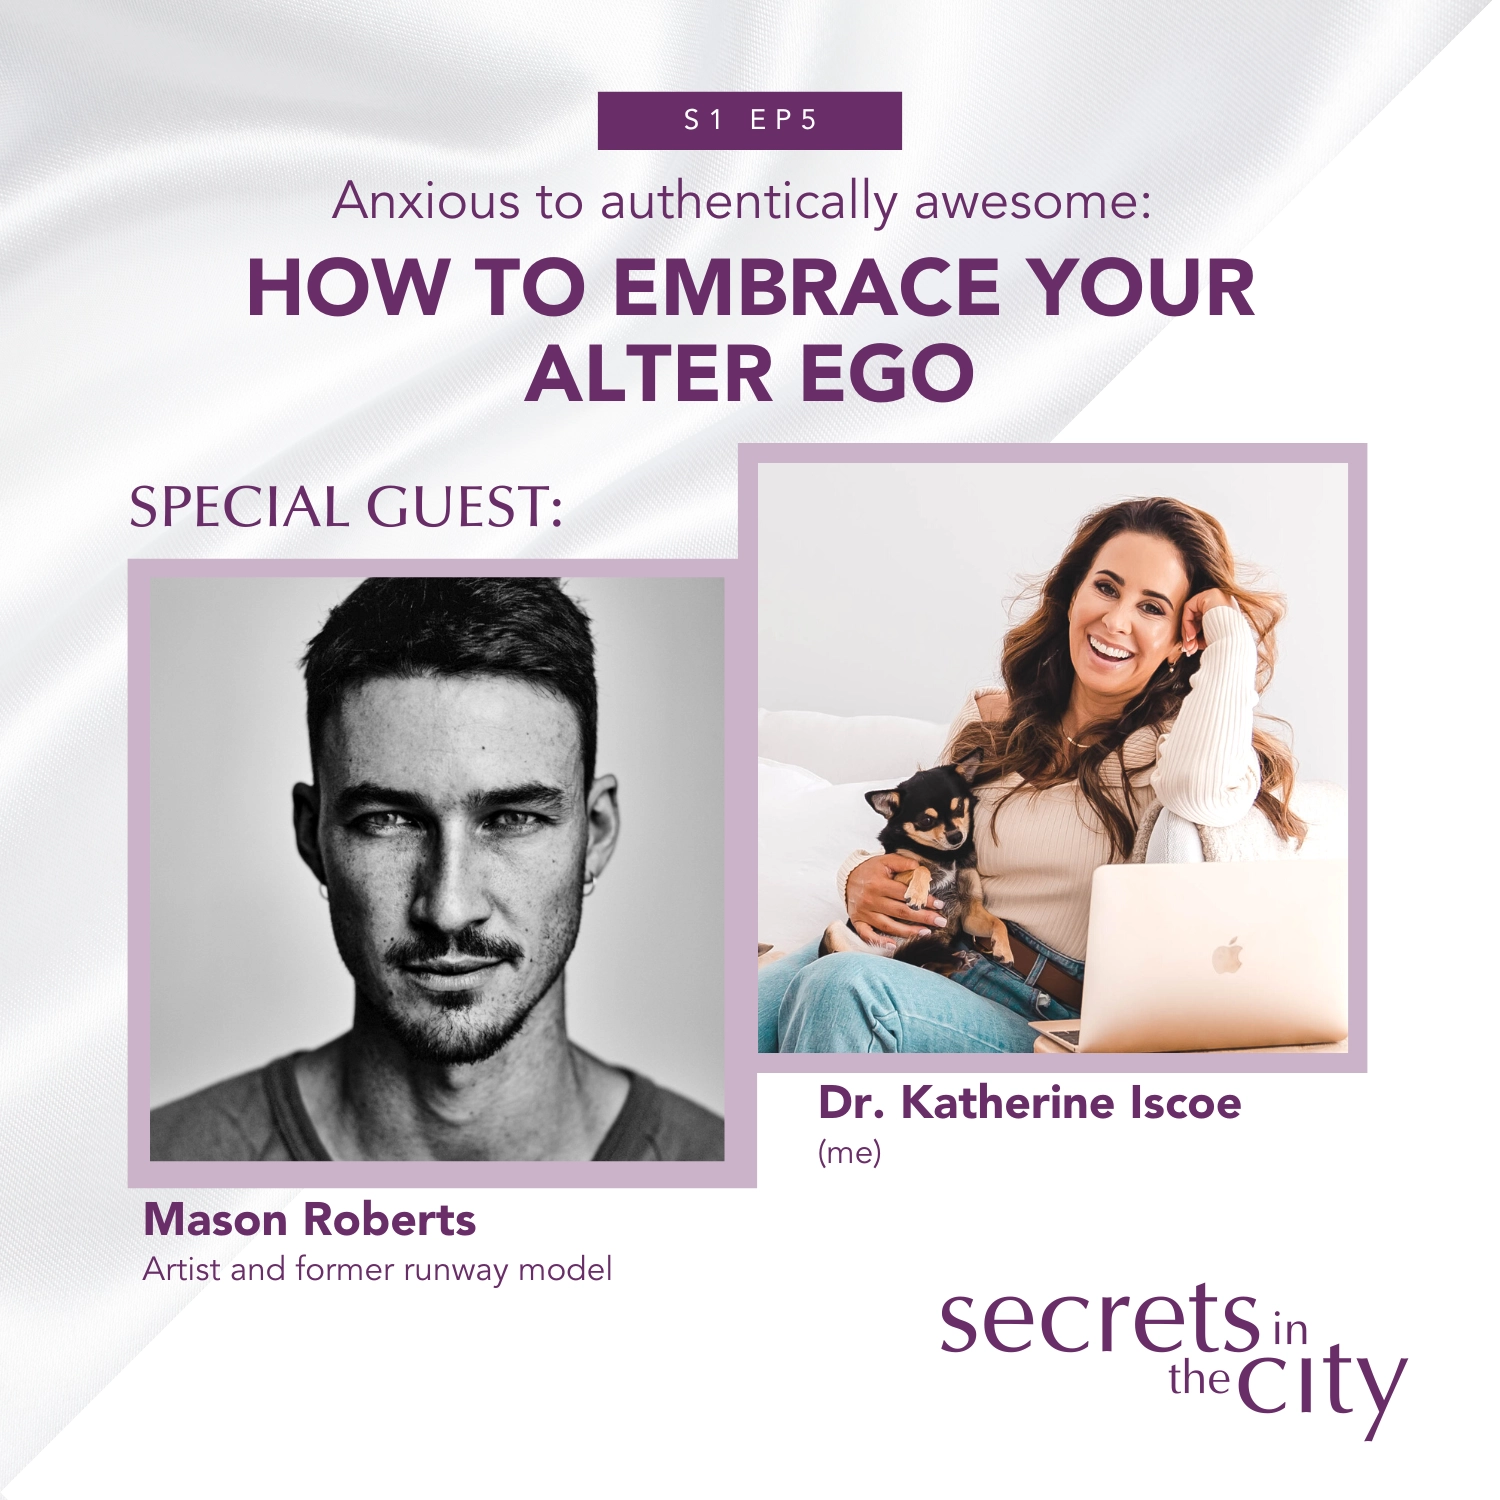 Anxious to Authentically Awesome - Secrets in the City podcast cover featuring photos of Mason Roberts and Dr. Katherine Iscoe